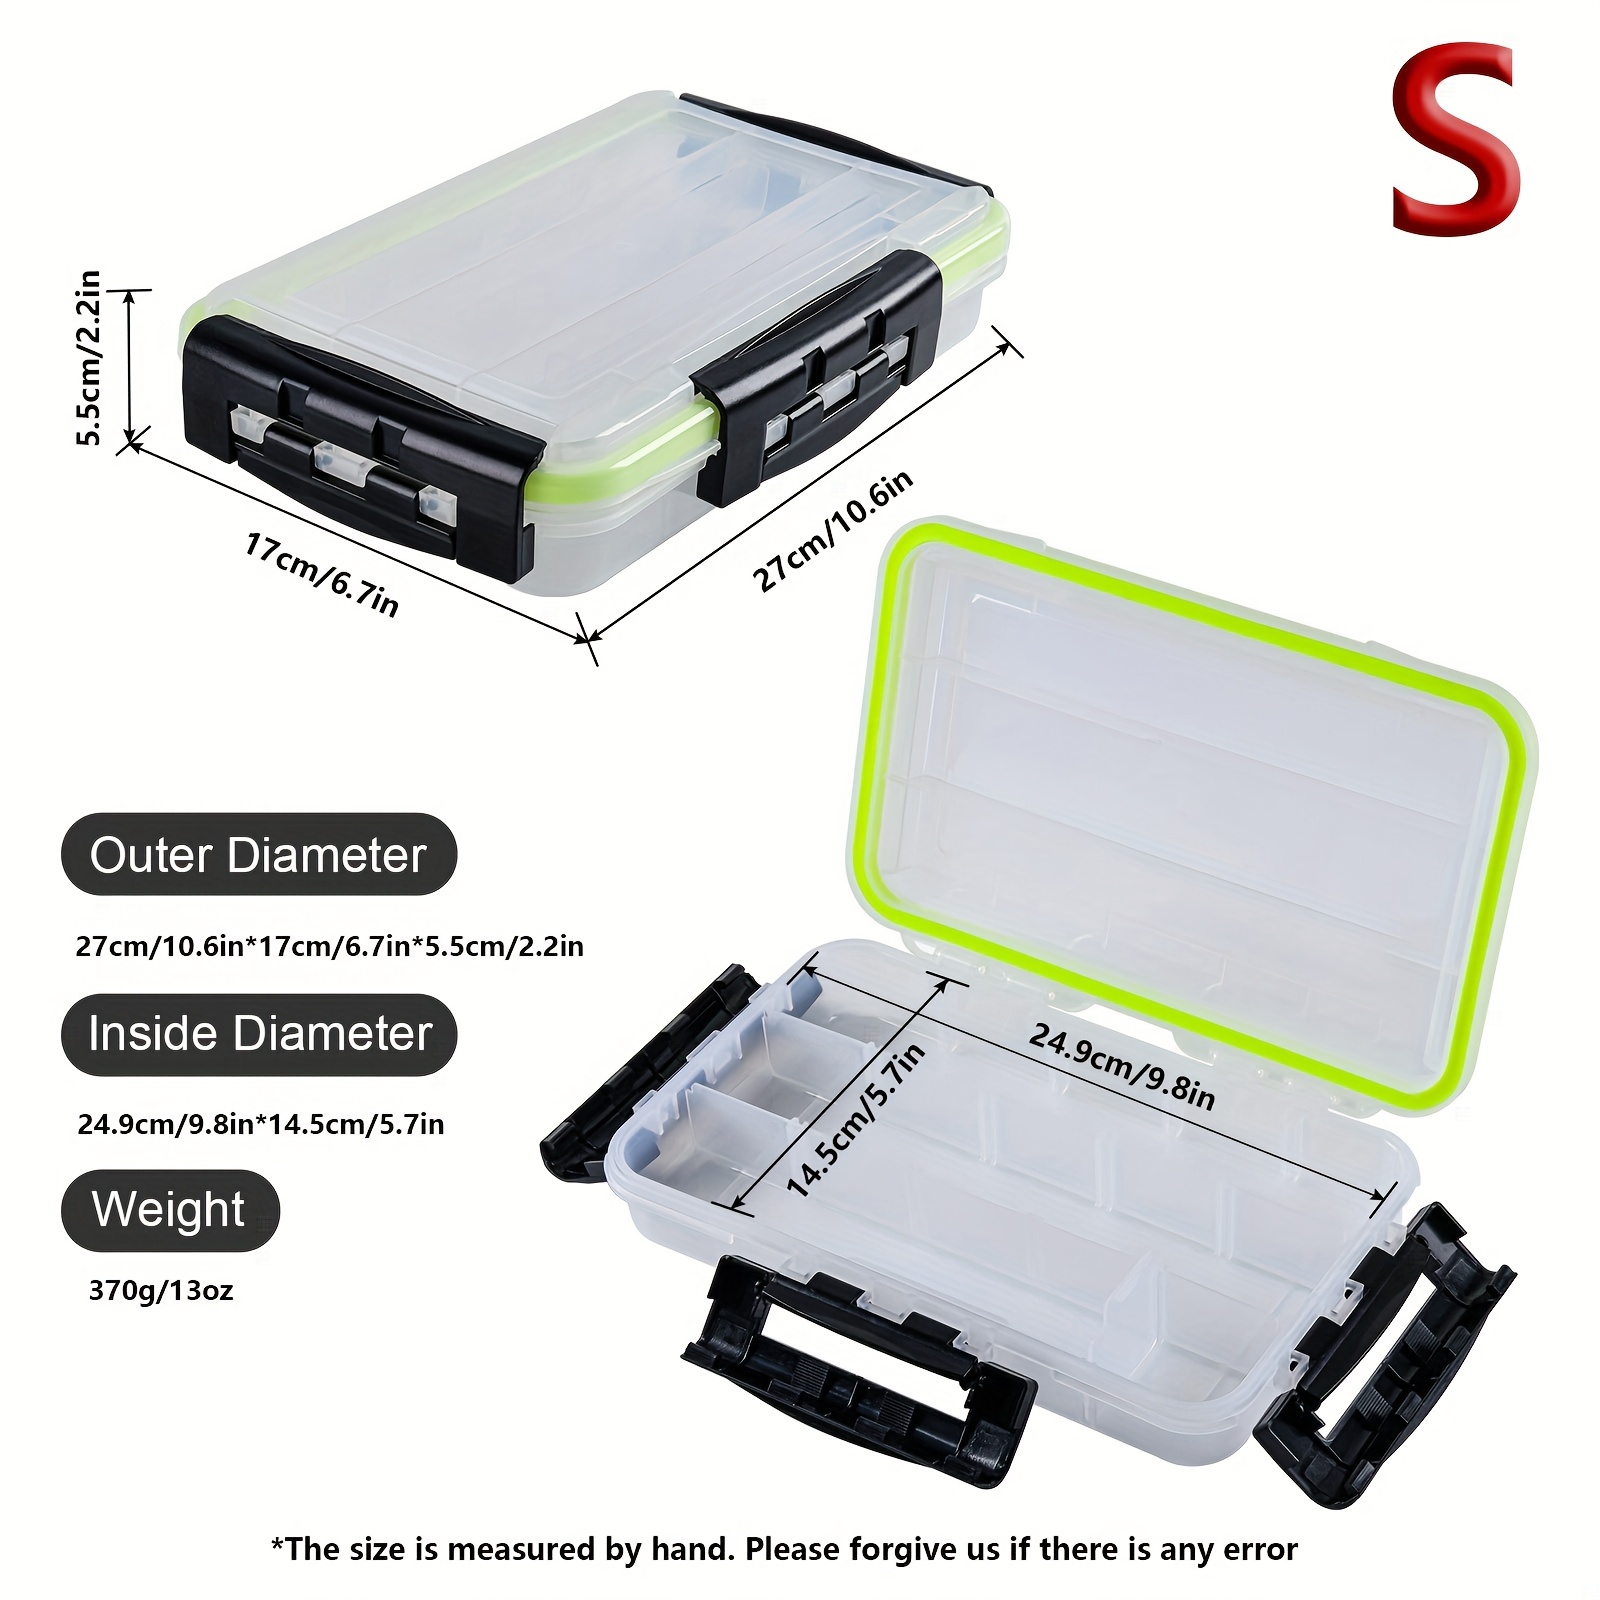 Organize Your Fishing Tackle Box With Goture's 1pc Airtight, Waterproof,  Floating Tray 3600/3700 Dividers!, Small Waterproof Tackle Box